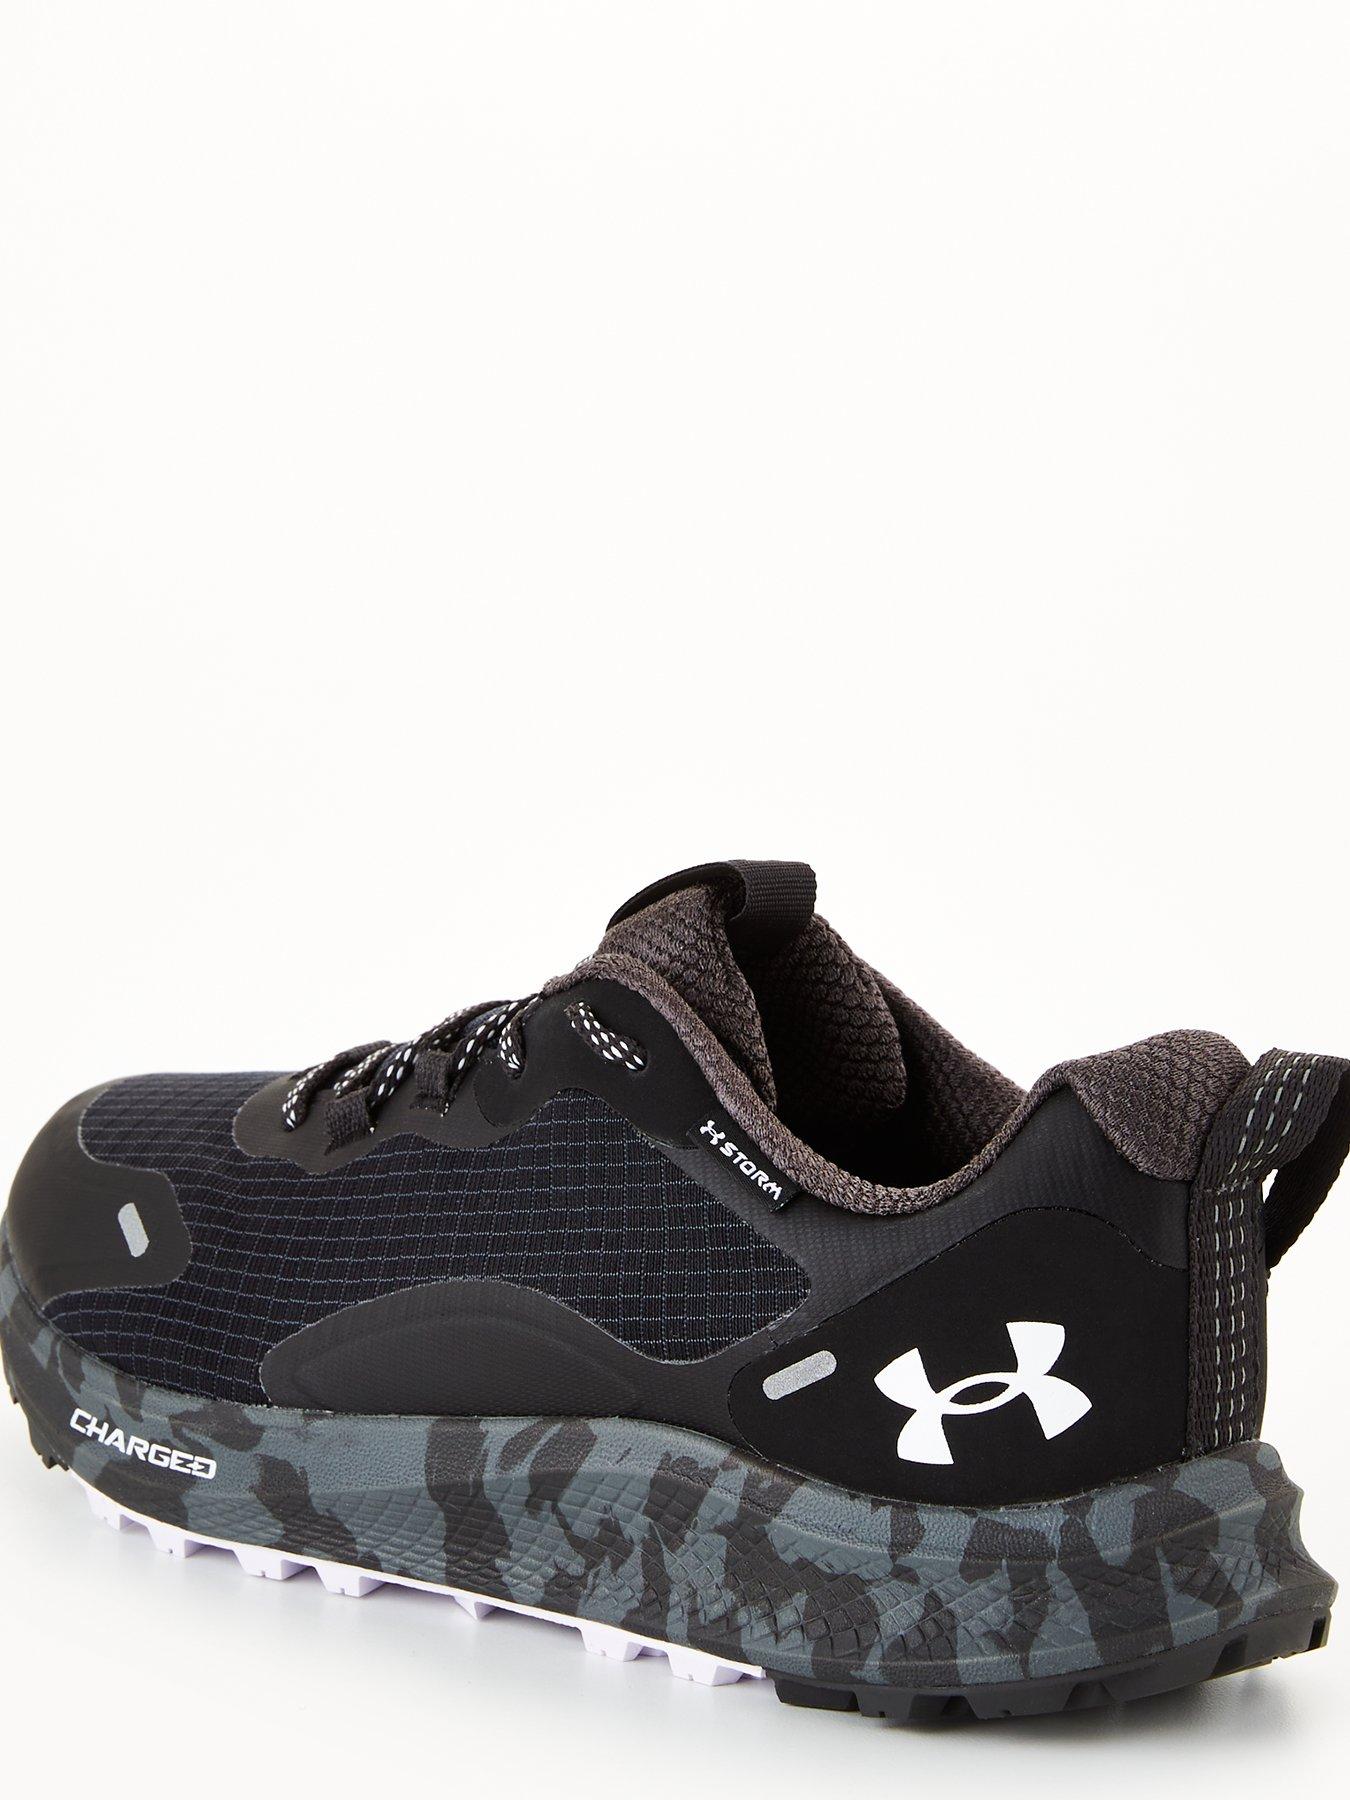 UNDER ARMOUR Charged Bandit Trail 2 SP - Black/Multi very.co.uk